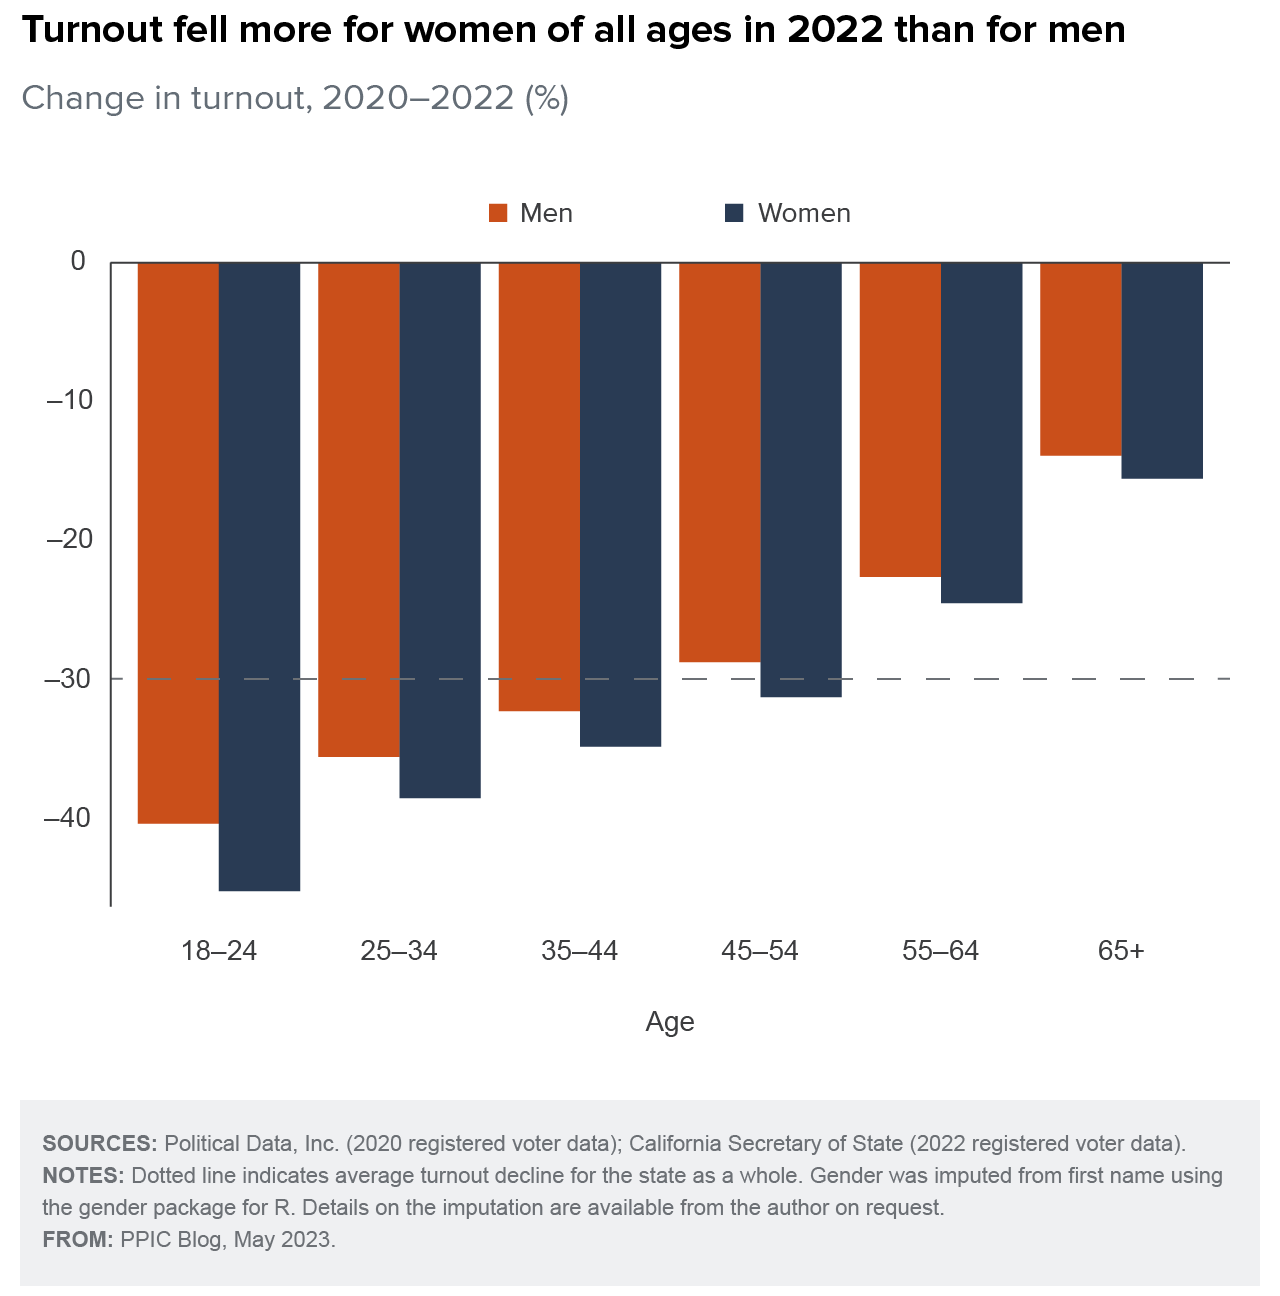 figure - Turnout fell more for women of all ages in 2022 than for men